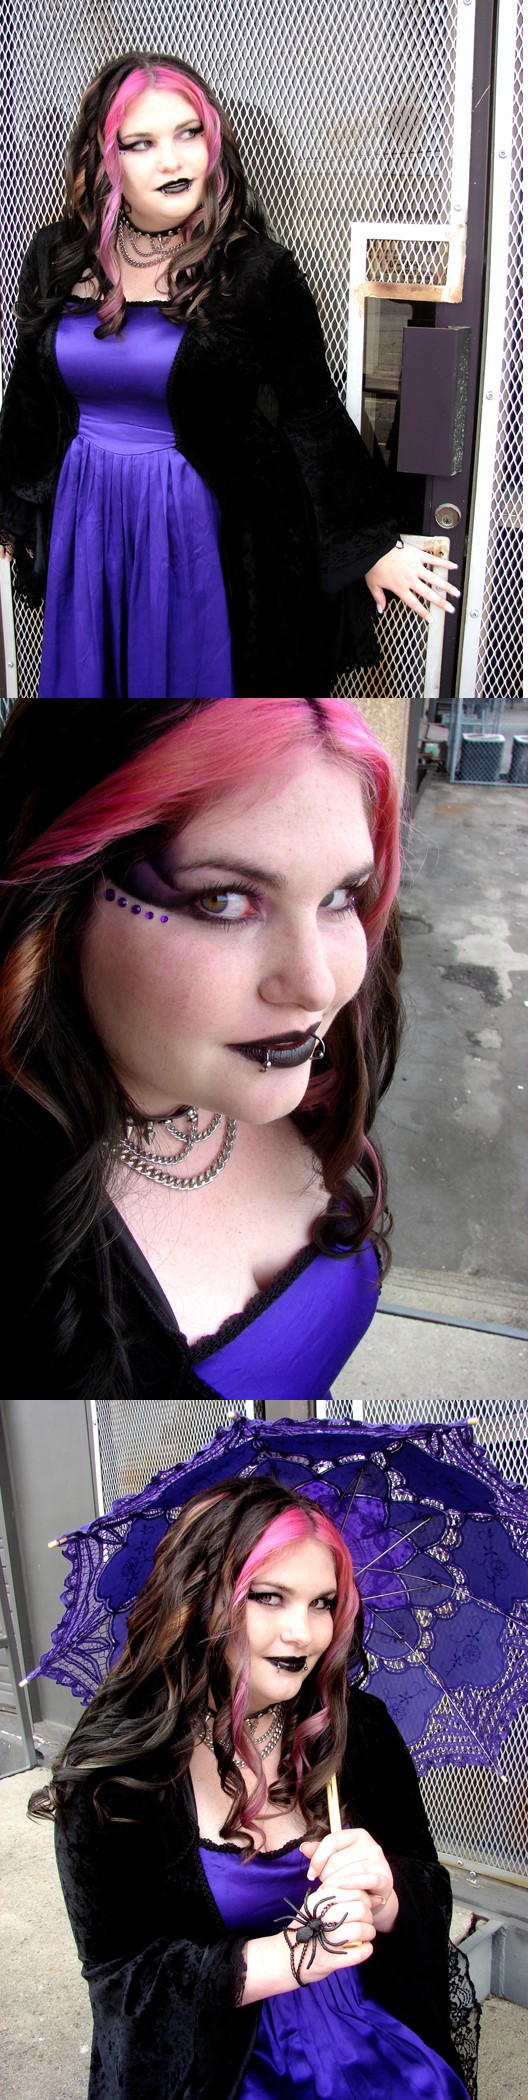 Female model photo shoot of Vivica Tragedy by Charlatan Photography in Little Rock, AR, makeup by Blink in Color